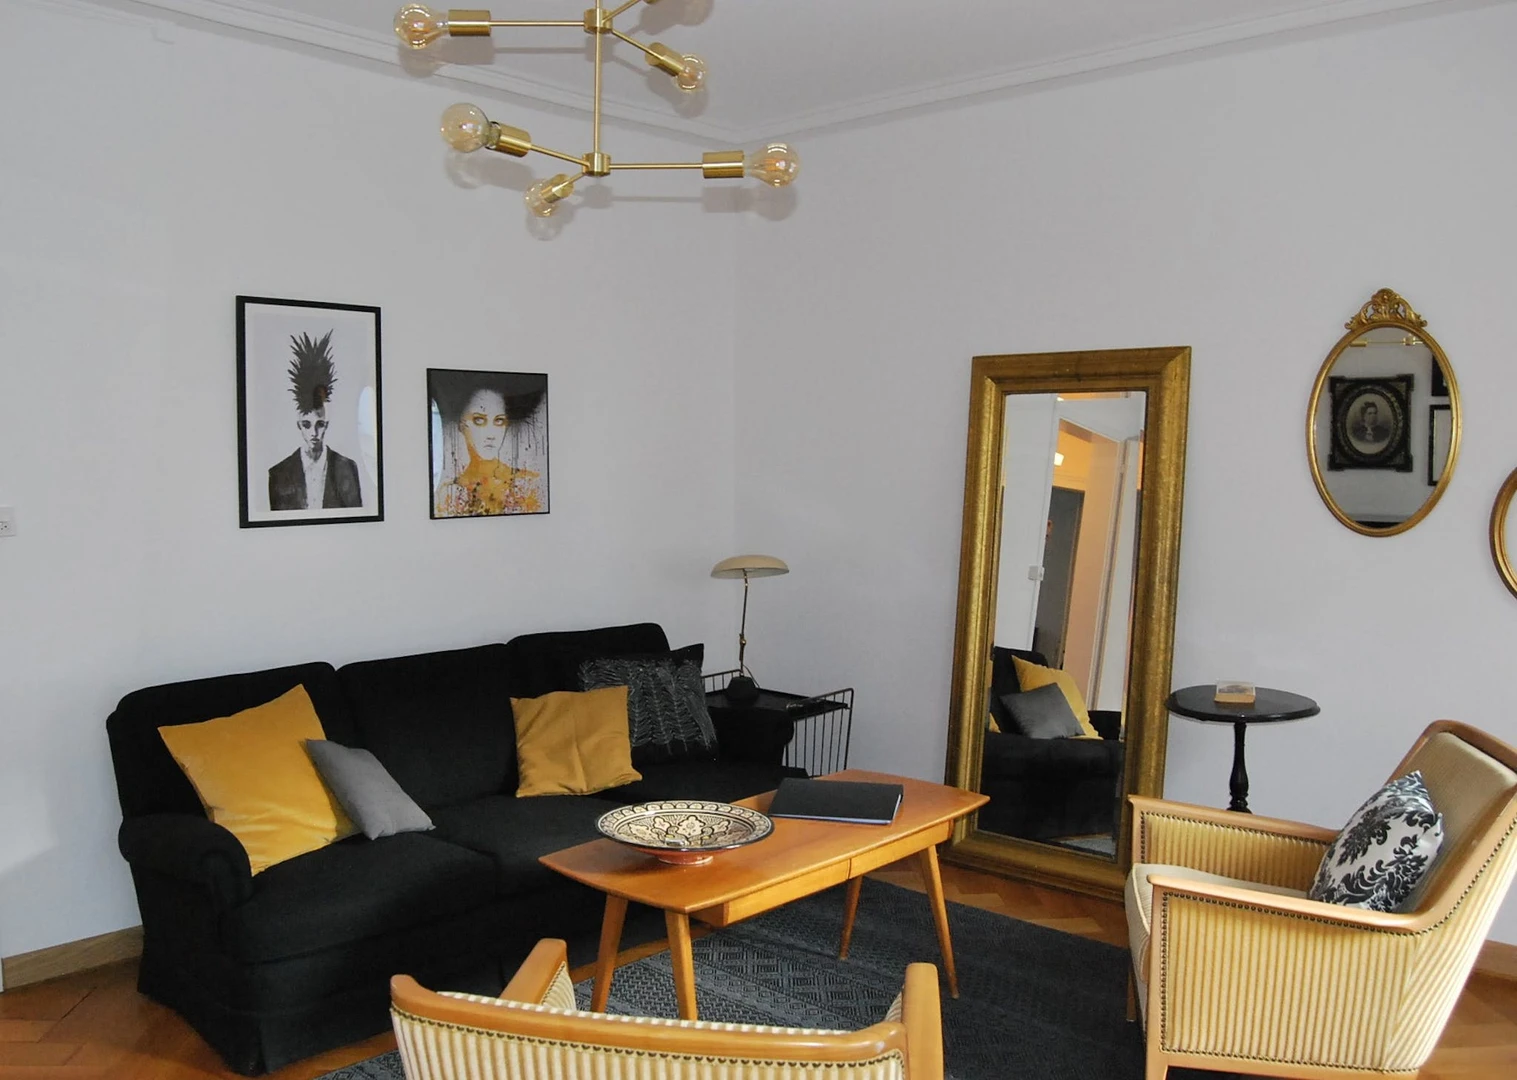 Accommodation with 3 bedrooms in Basel